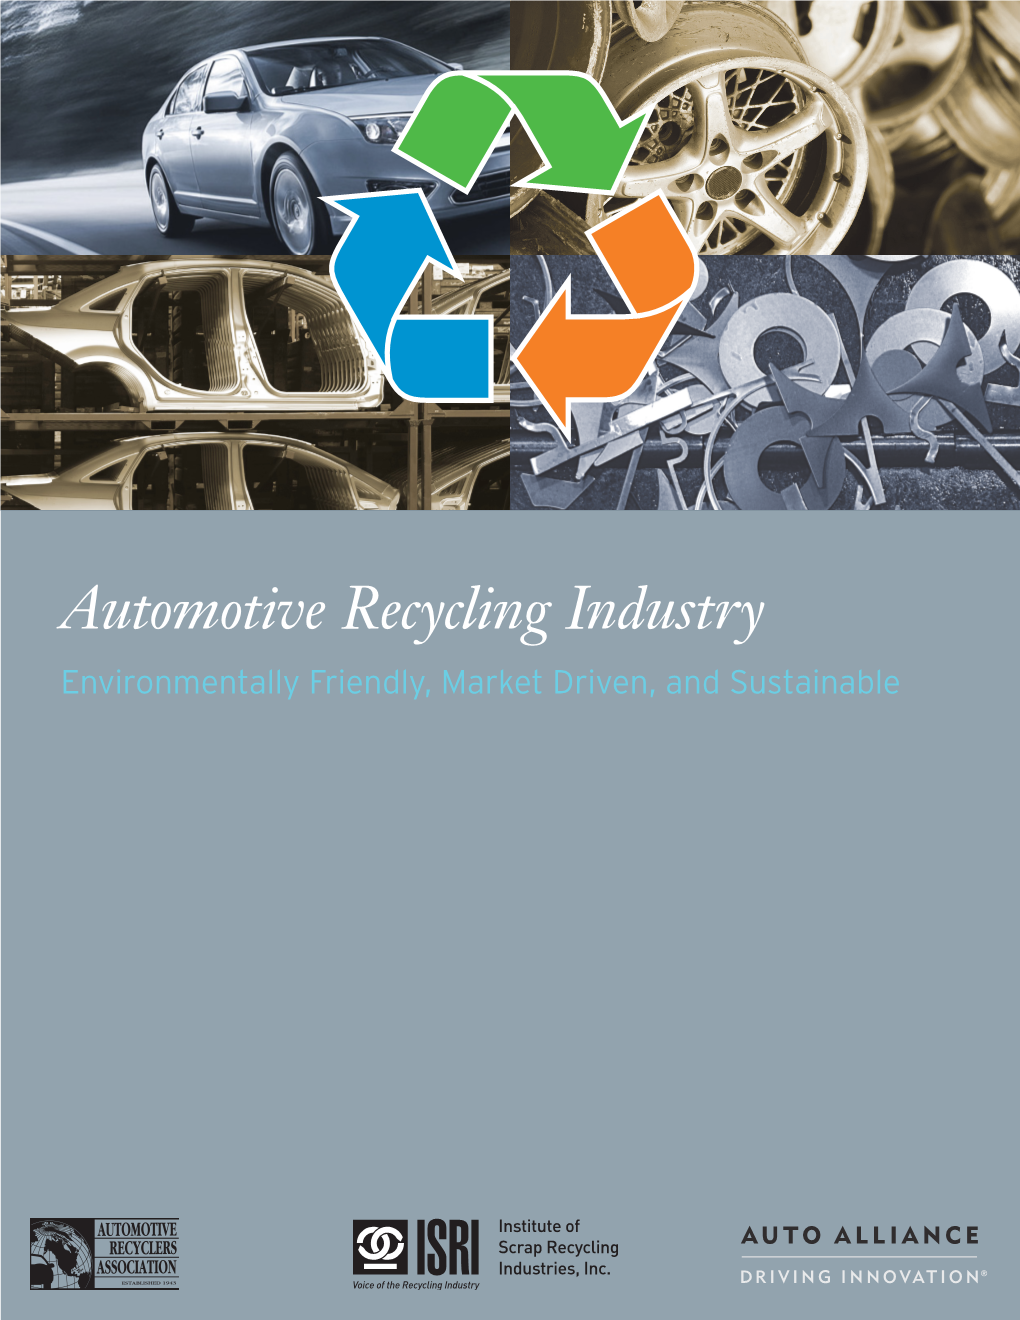 Automotive Recycling Industry